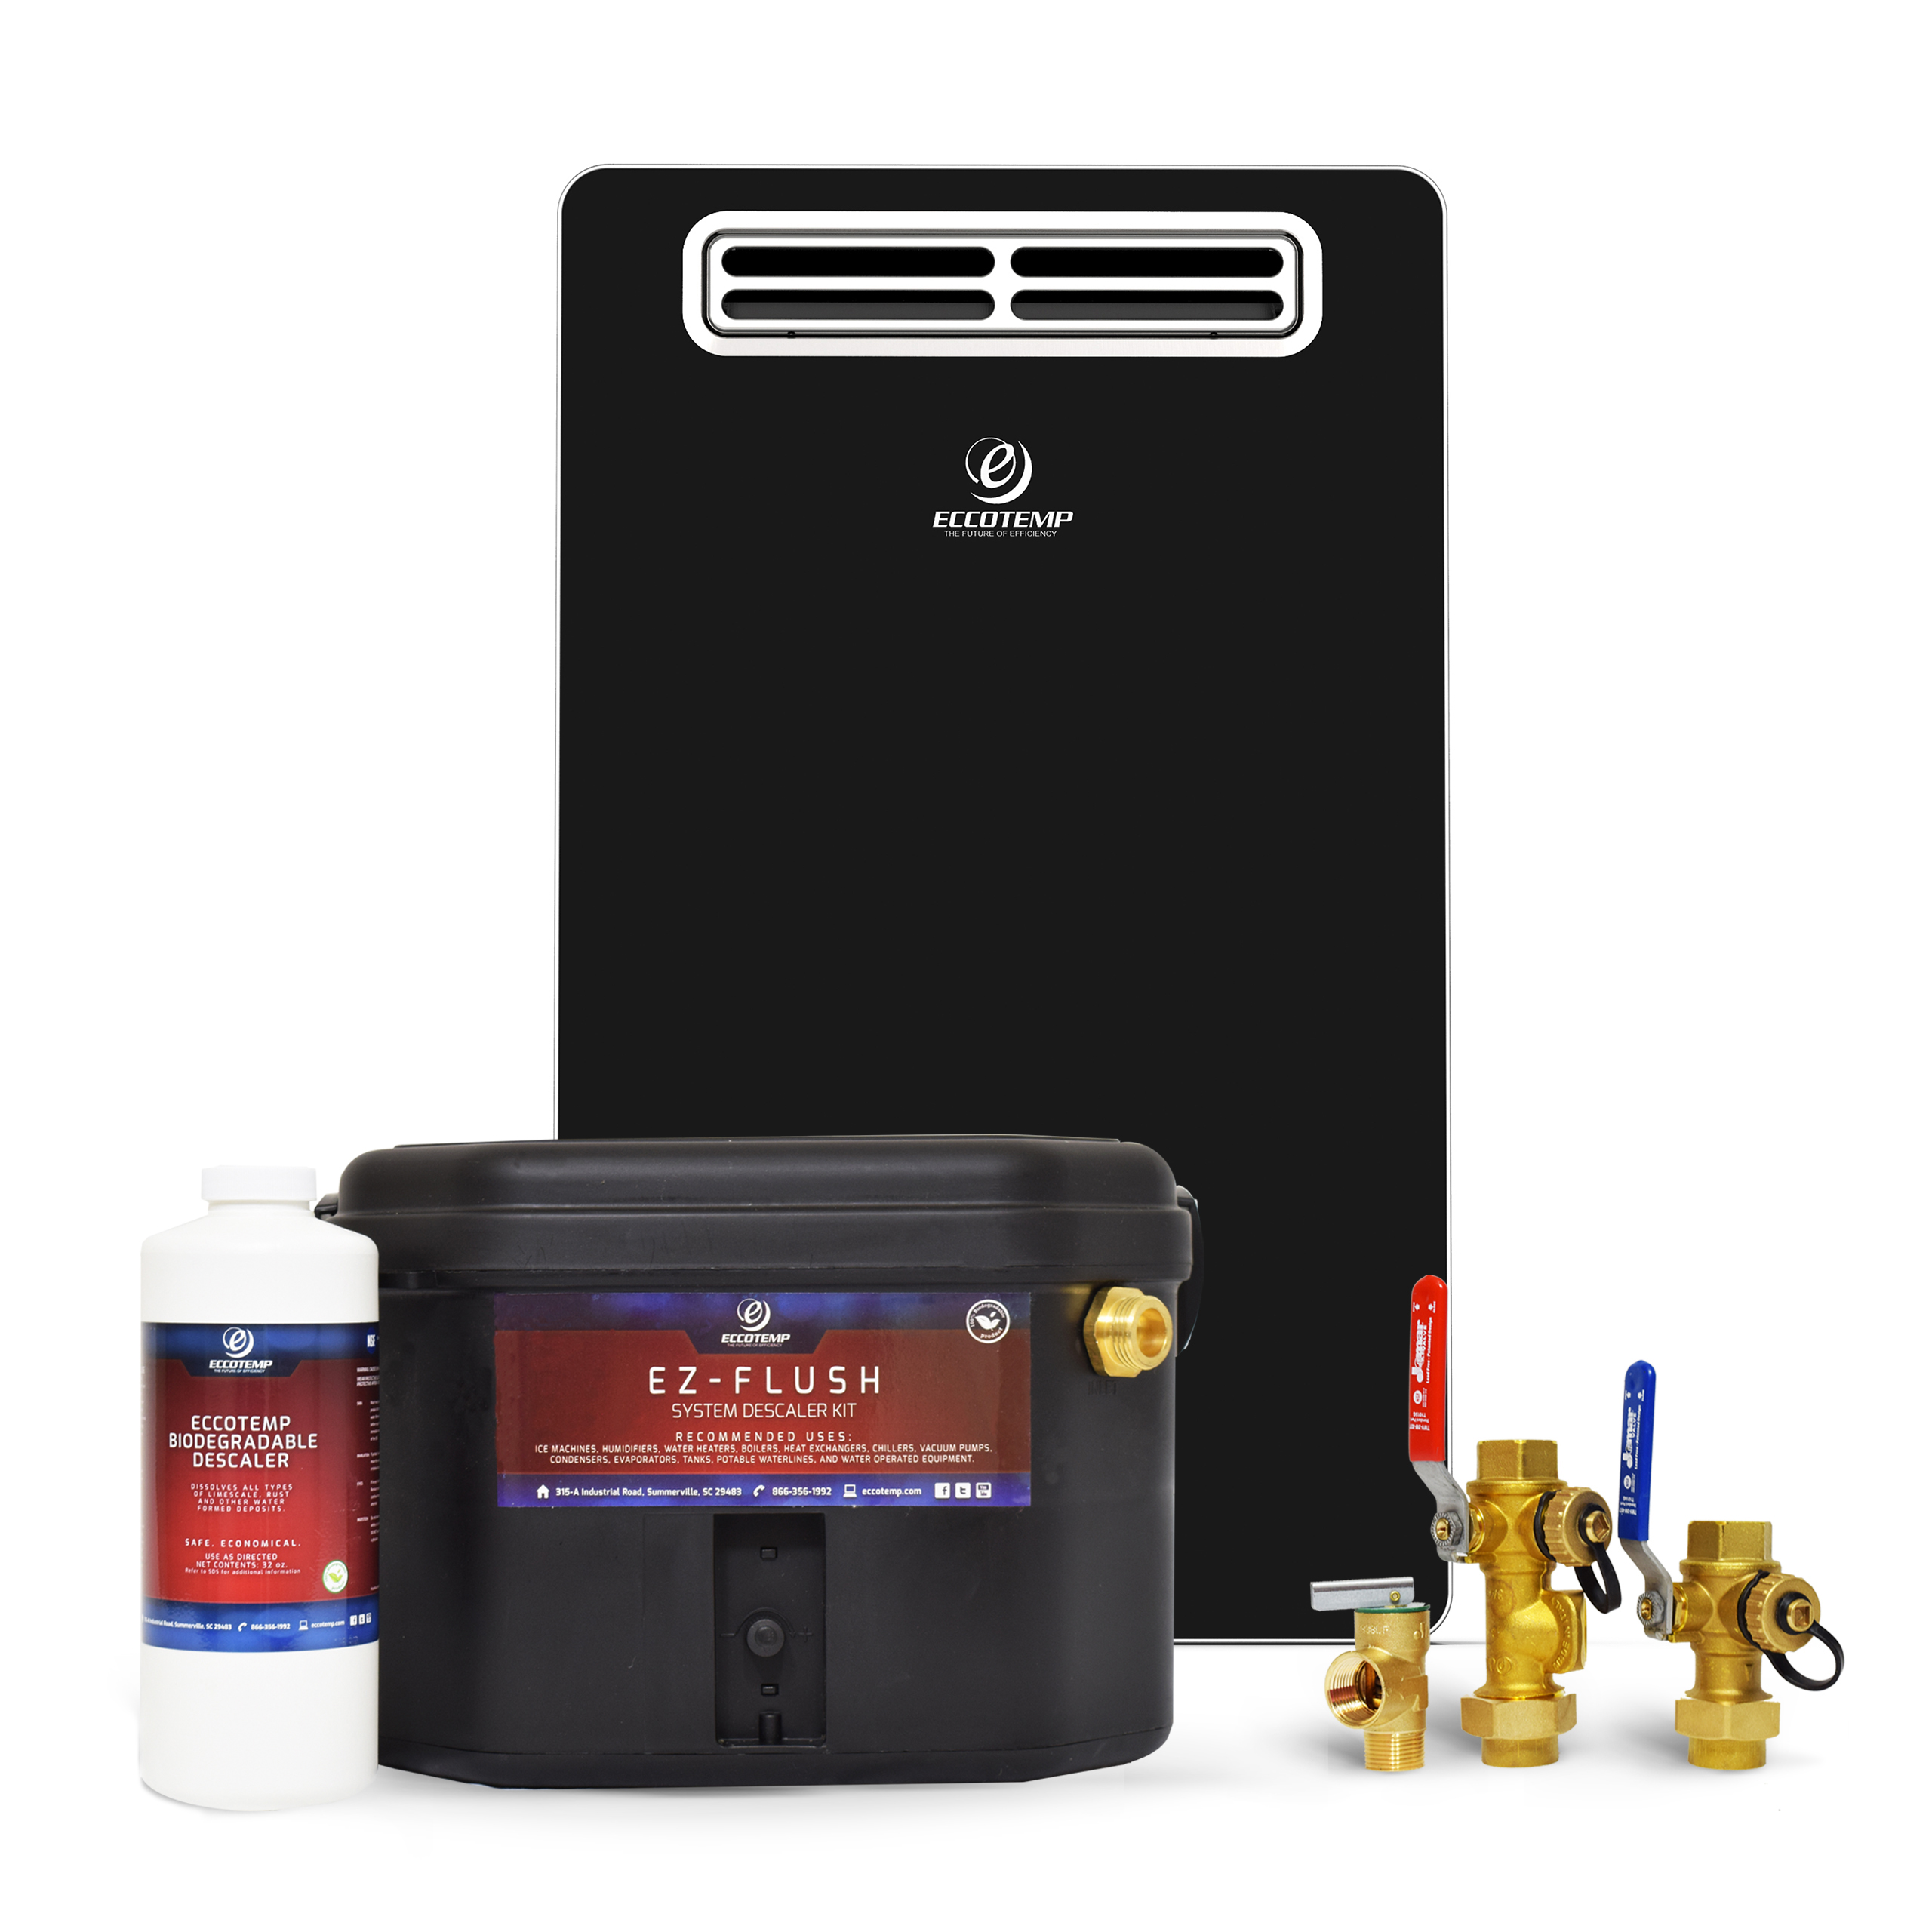 Eccotemp EL22 Outdoor 6.8 GPM Natural Gas Tankless Water Heater Service Kit Bundle